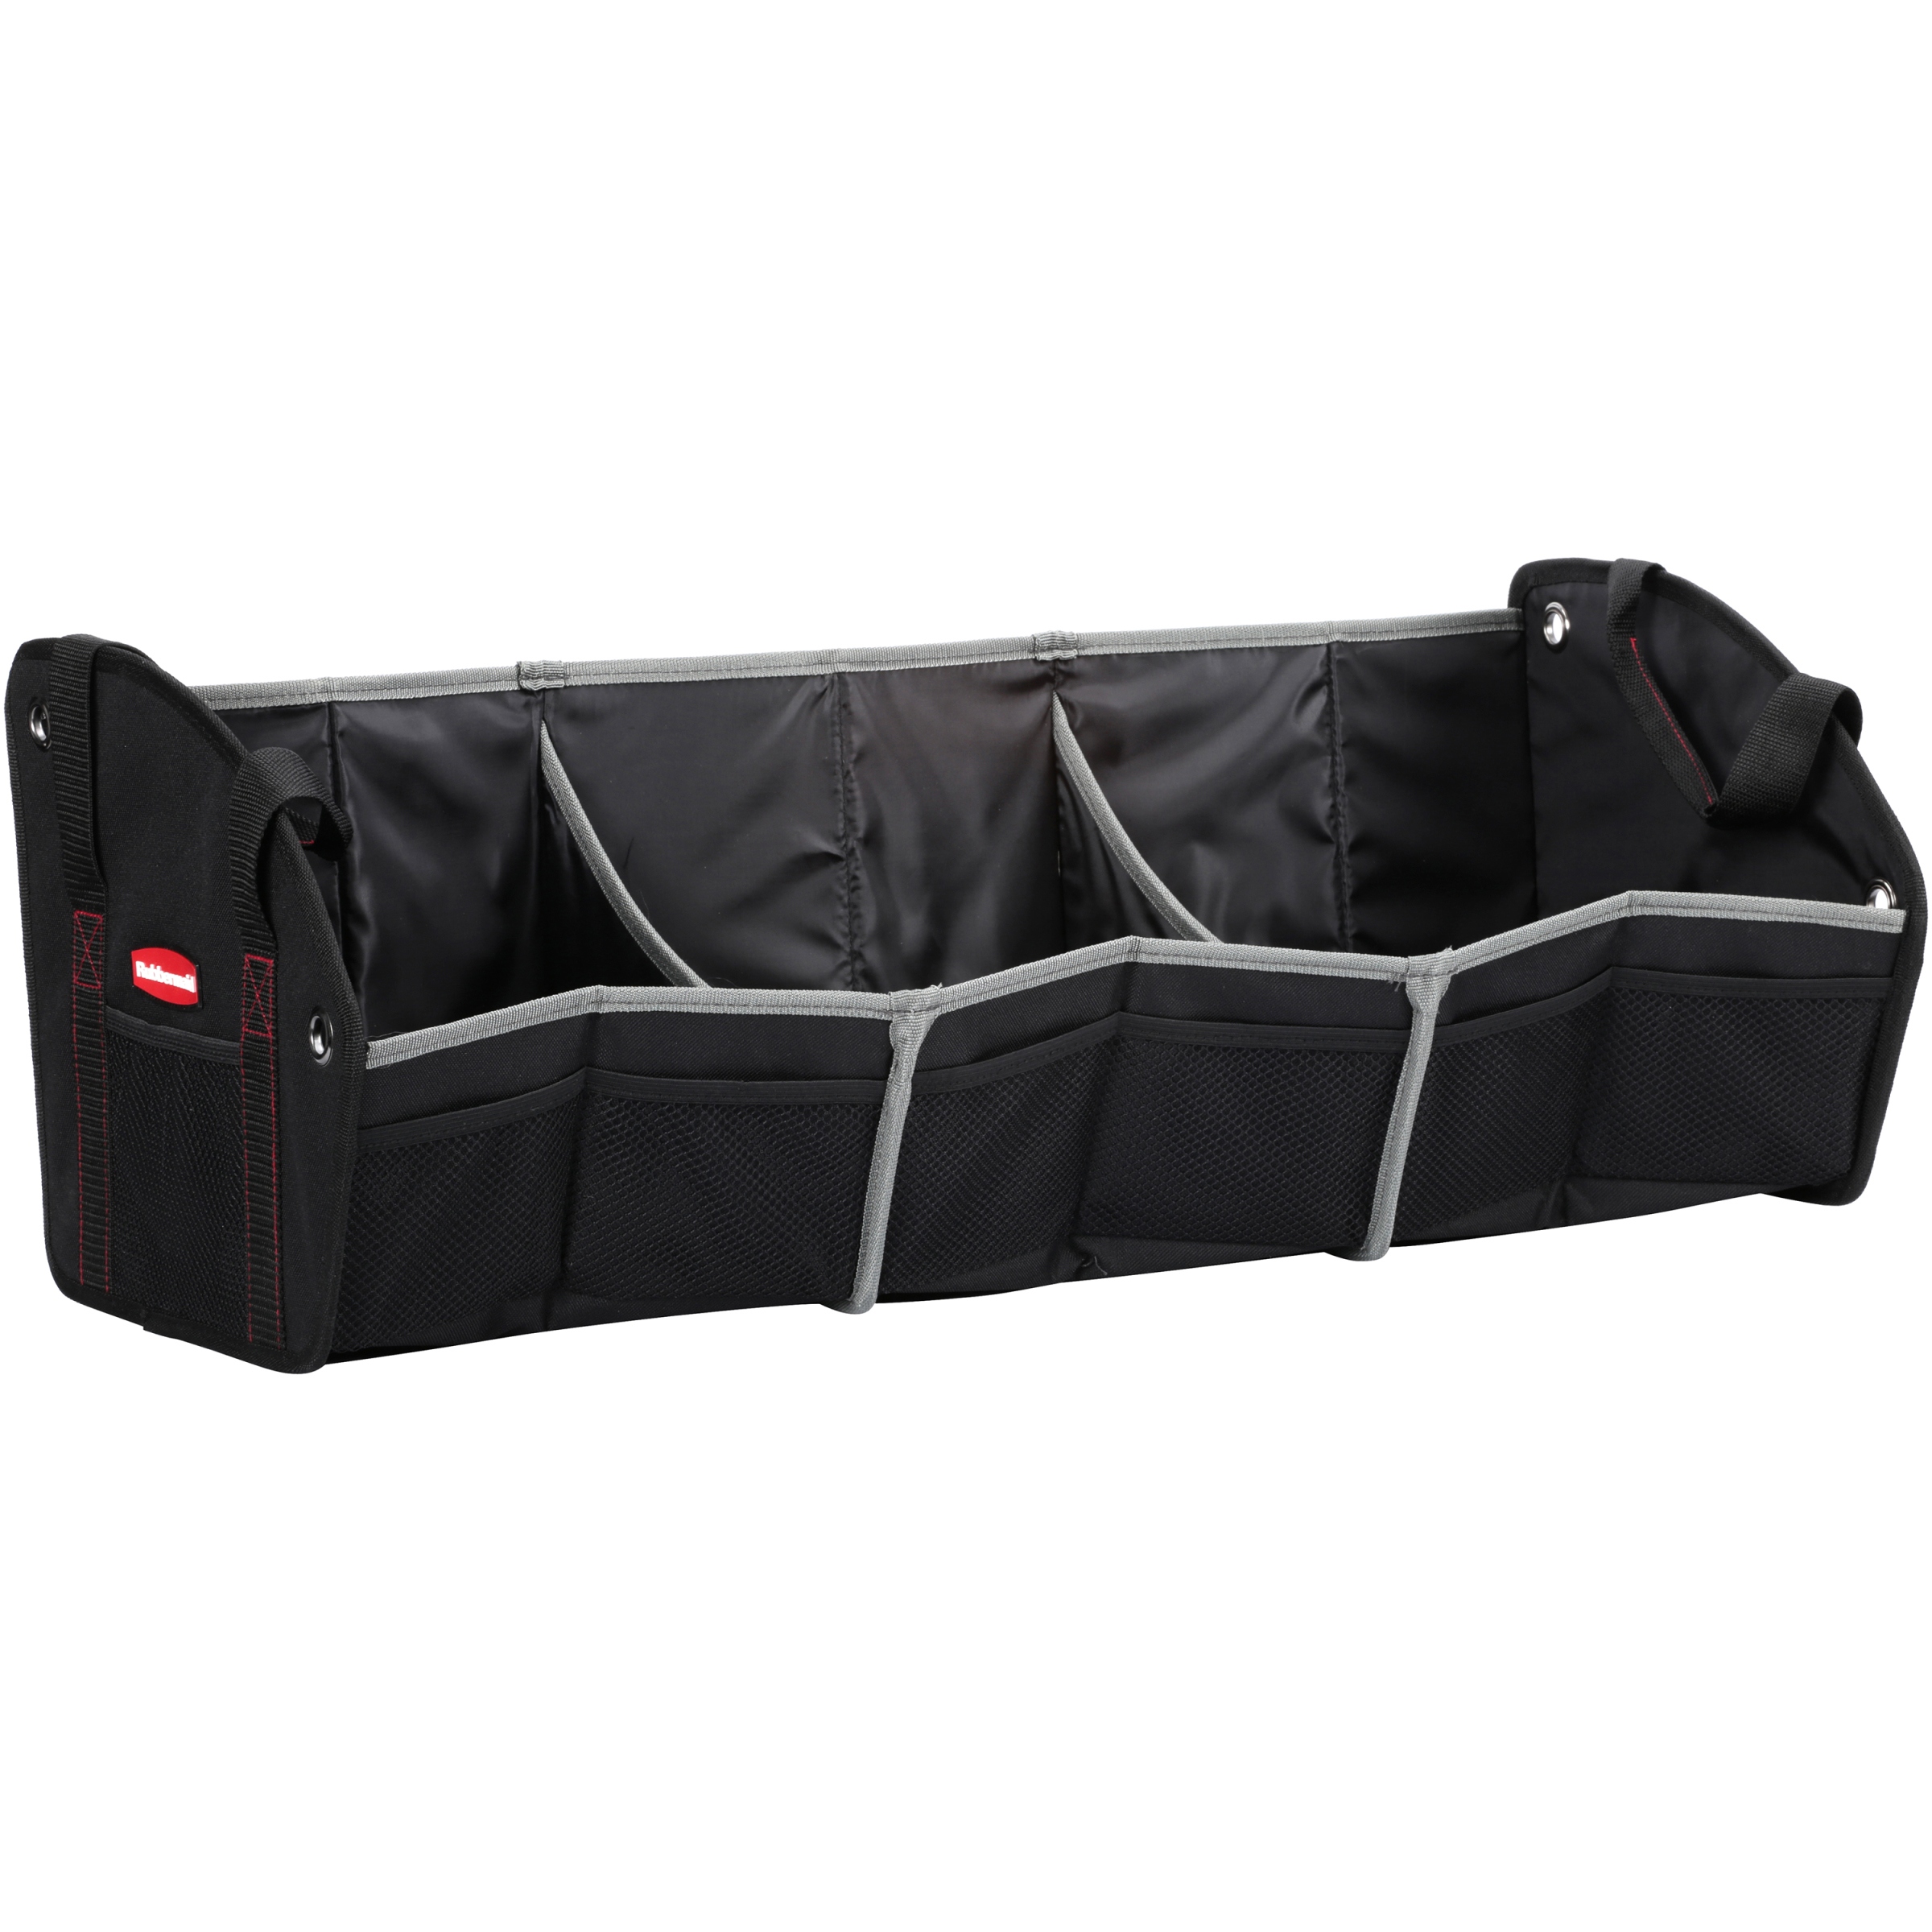 Rubbermaid Large Collapsible Cargo Organizer Bin Car Interior Organization Non-Slip Perfect for Trunk and Groceries - image 5 of 6